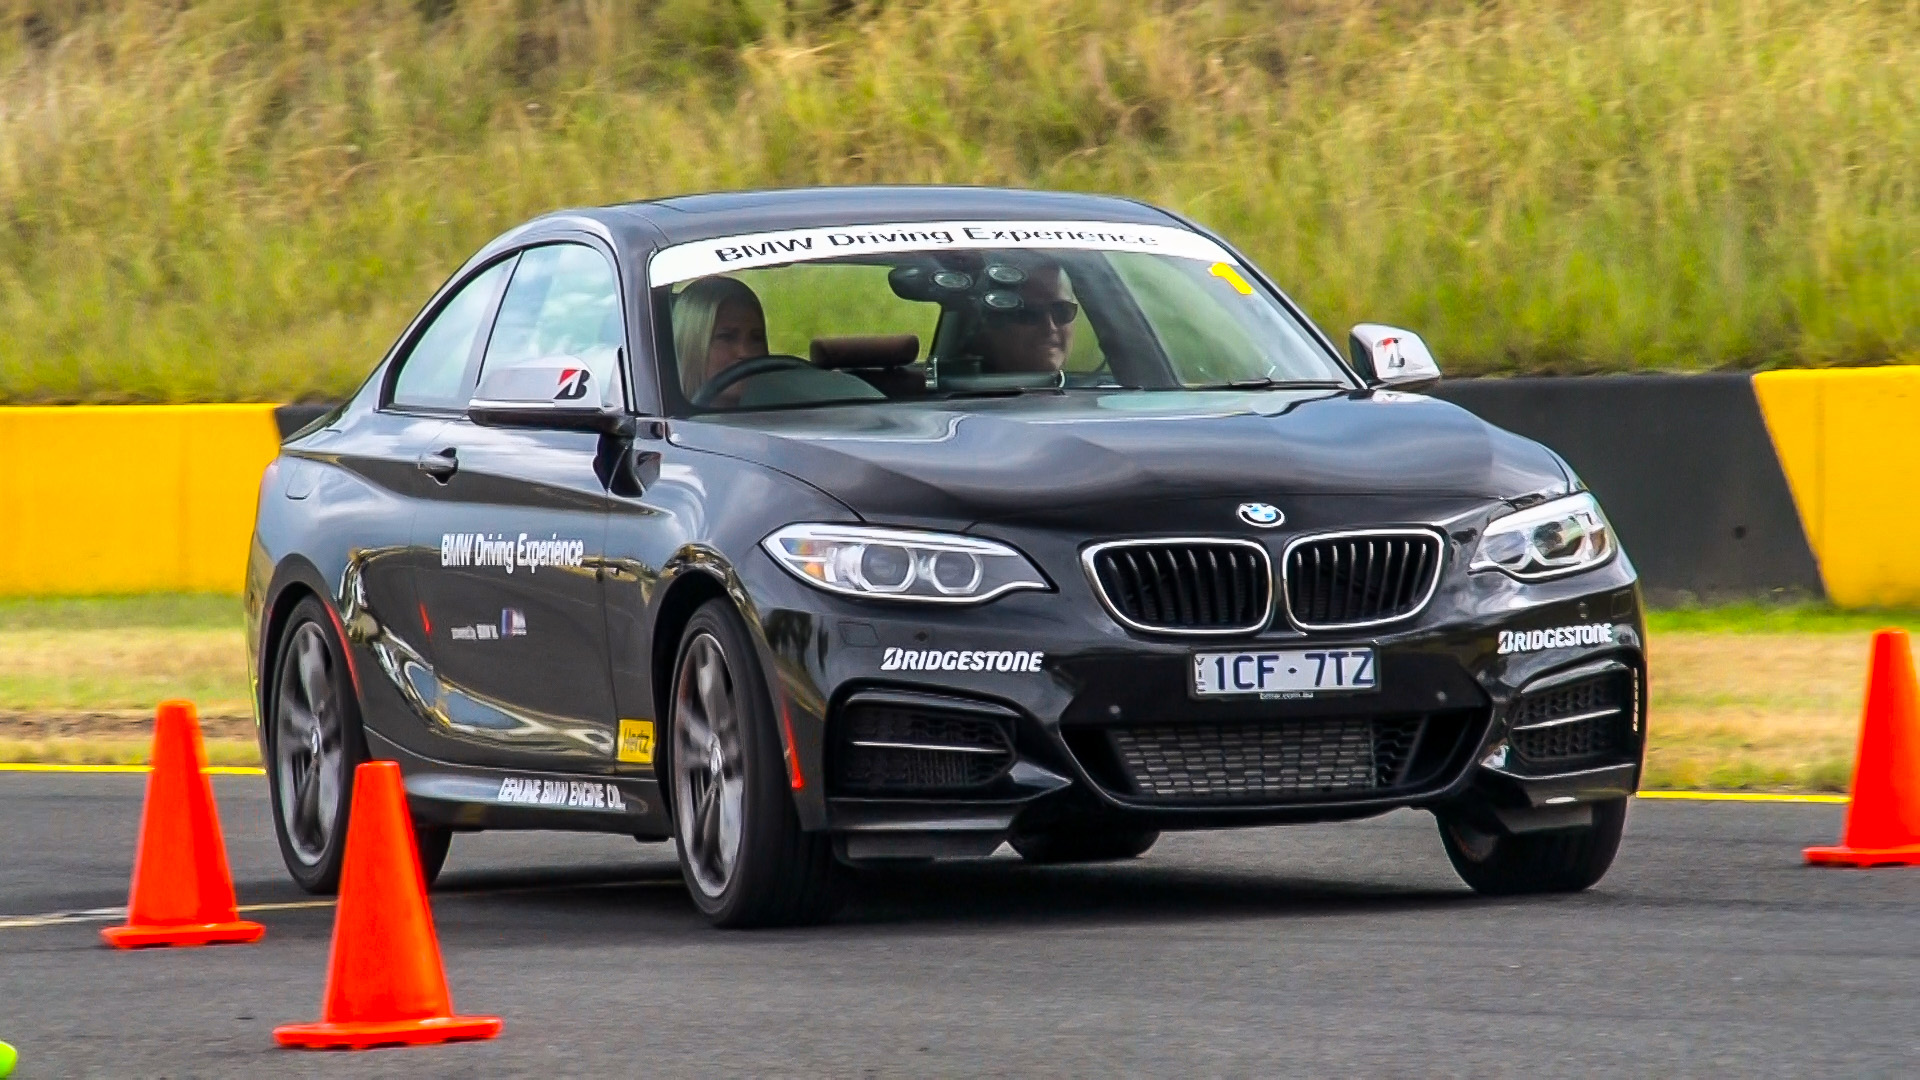 Bmw intensive driver training review #6